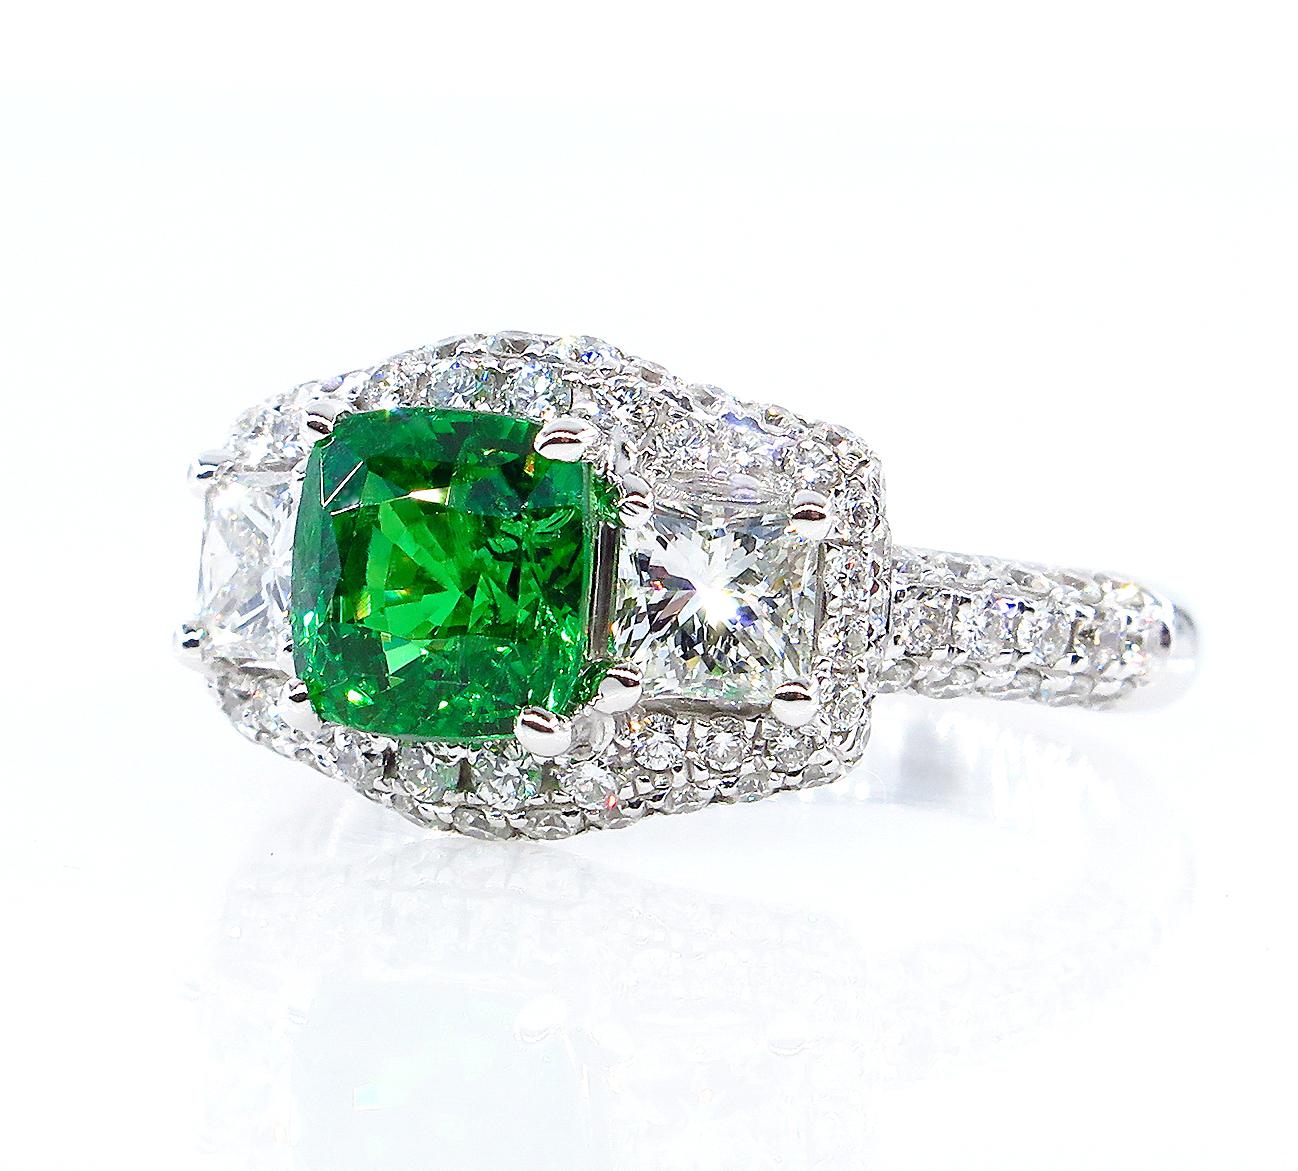 Tsavorite has all of the qualities you want in a gemstone: beauty, rarity, intrinsic value, and romance. With its natural, fresh green color and scintillating brilliance, Tsavorite is one of the most beautiful green gemstones in the world. Tsavorite